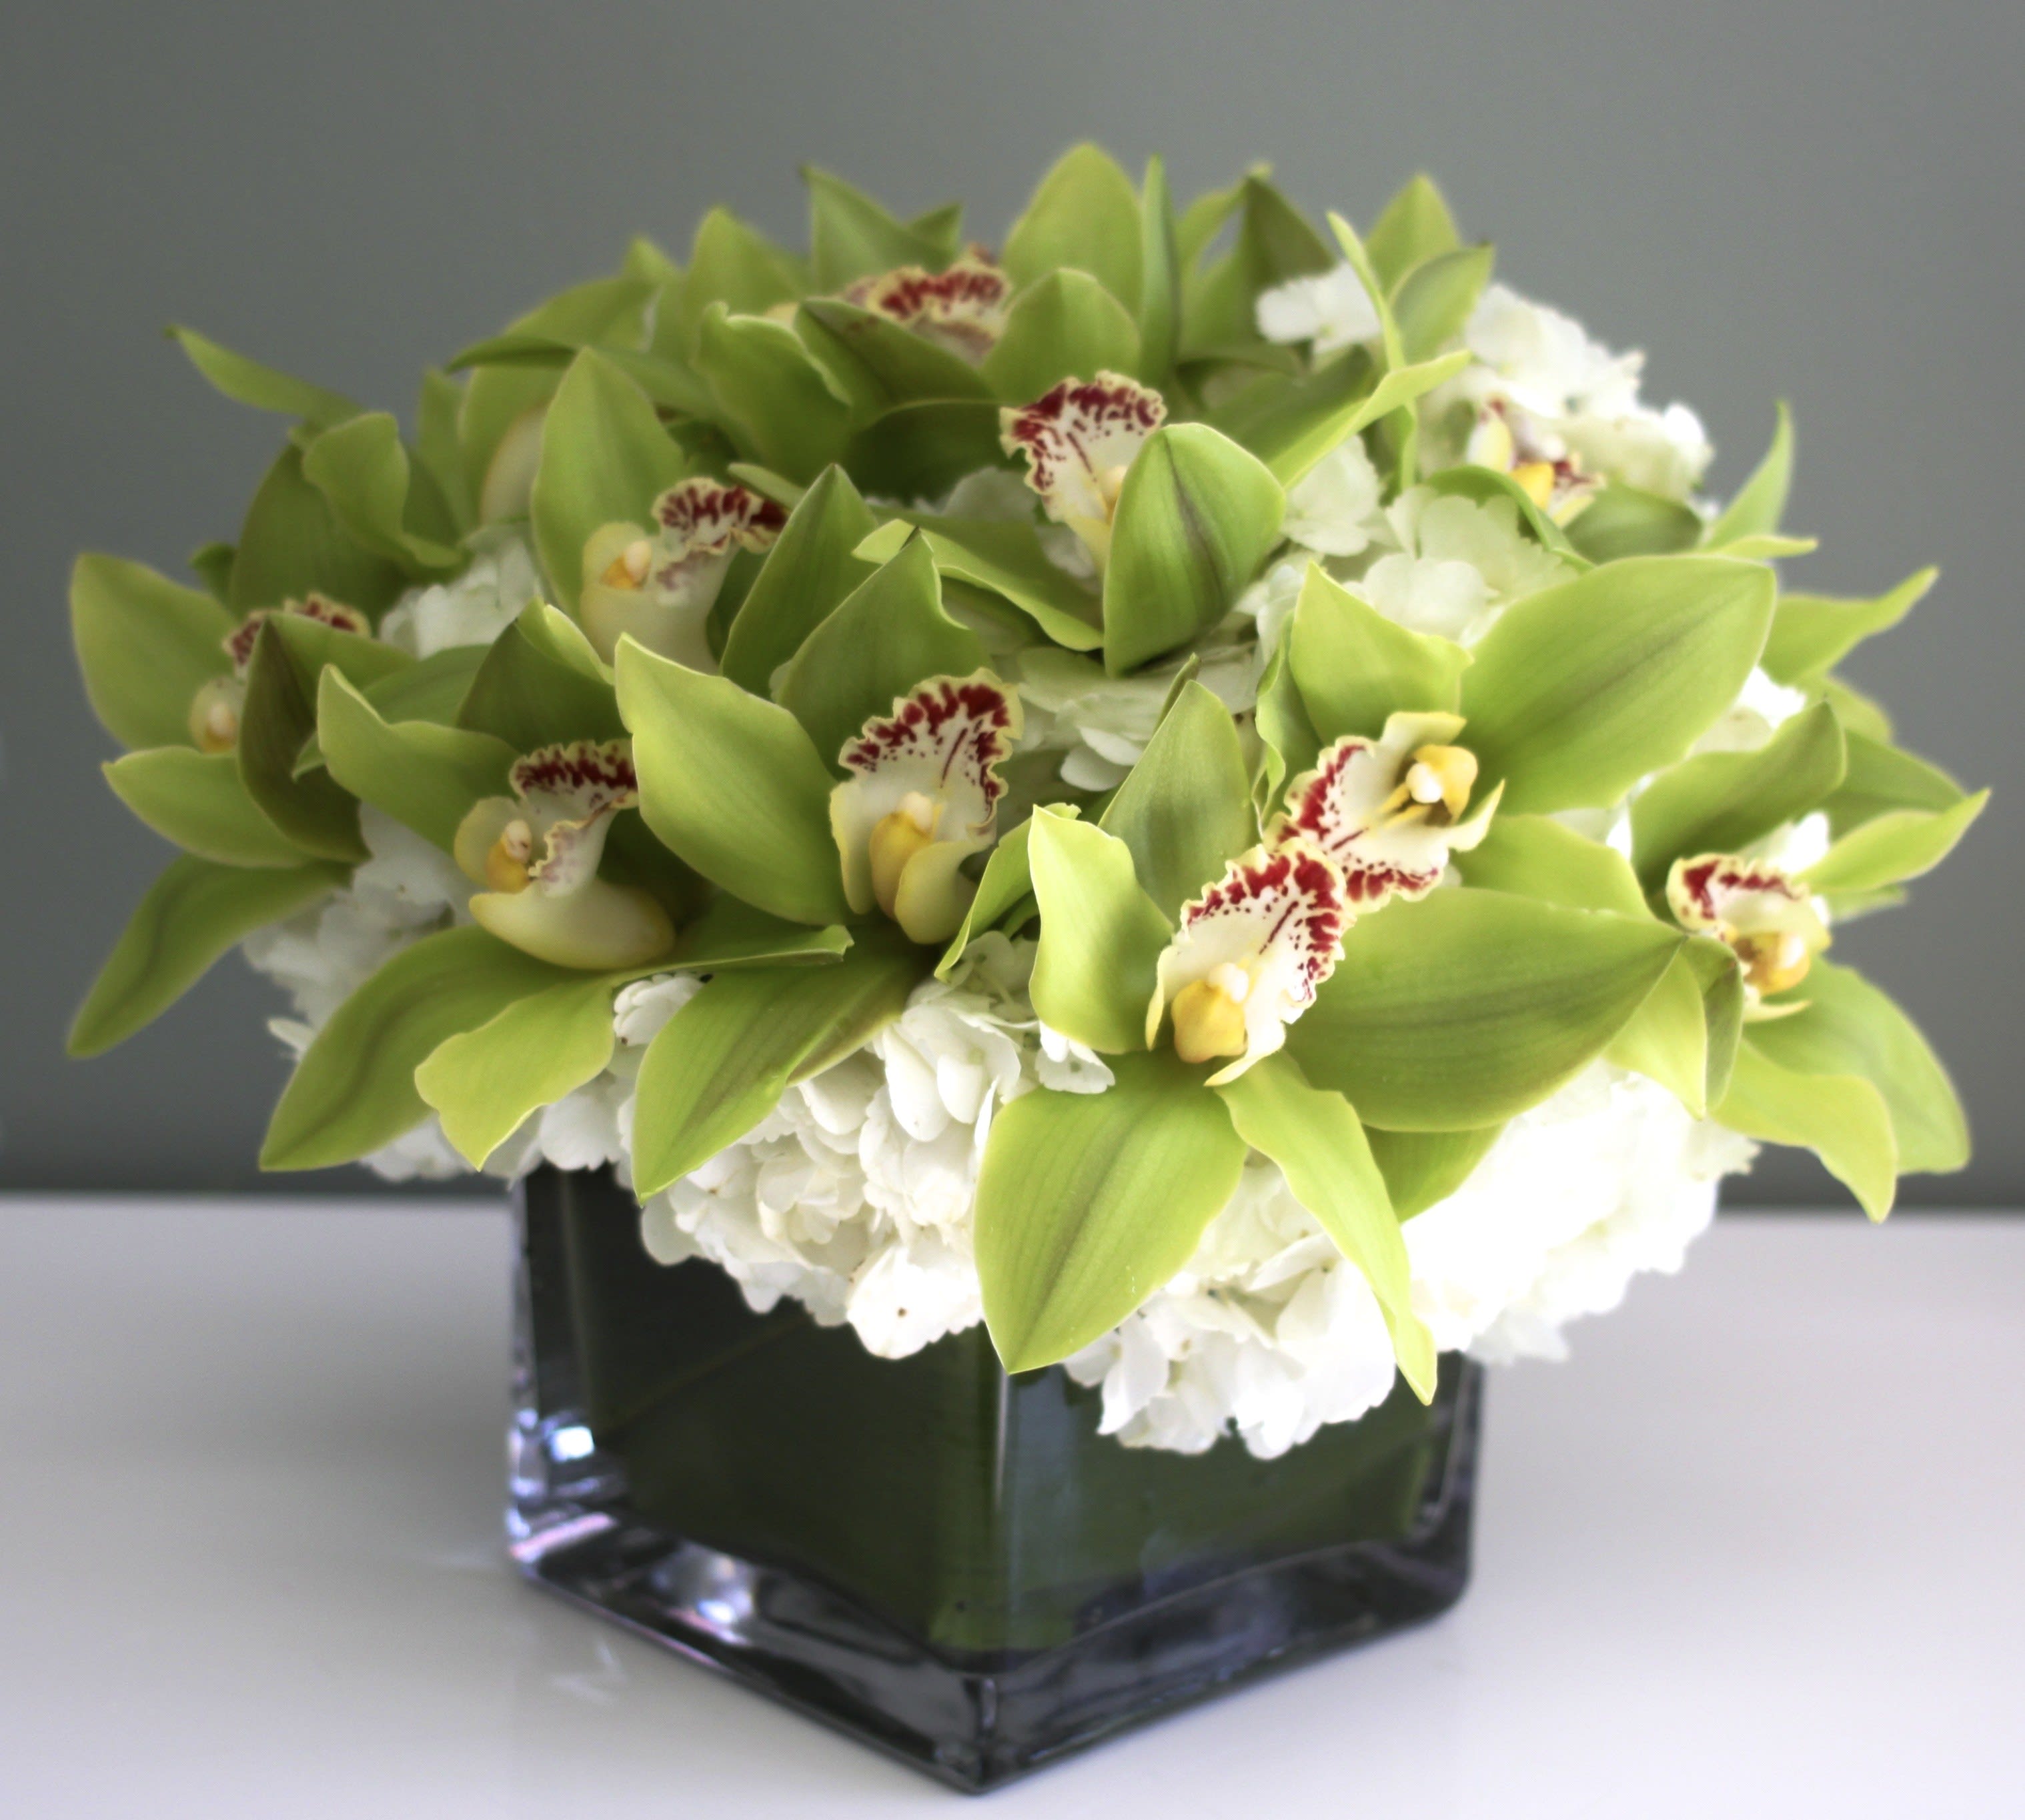 Orchid Tribute - Brilliant , Chartreuse Green Orchids  Nestled in a bed of white Hydrangea in a modern container fantastic choice for those who like &quot; a little classic and a little tropical&quot;    Photo Shown at Deluxe Version :